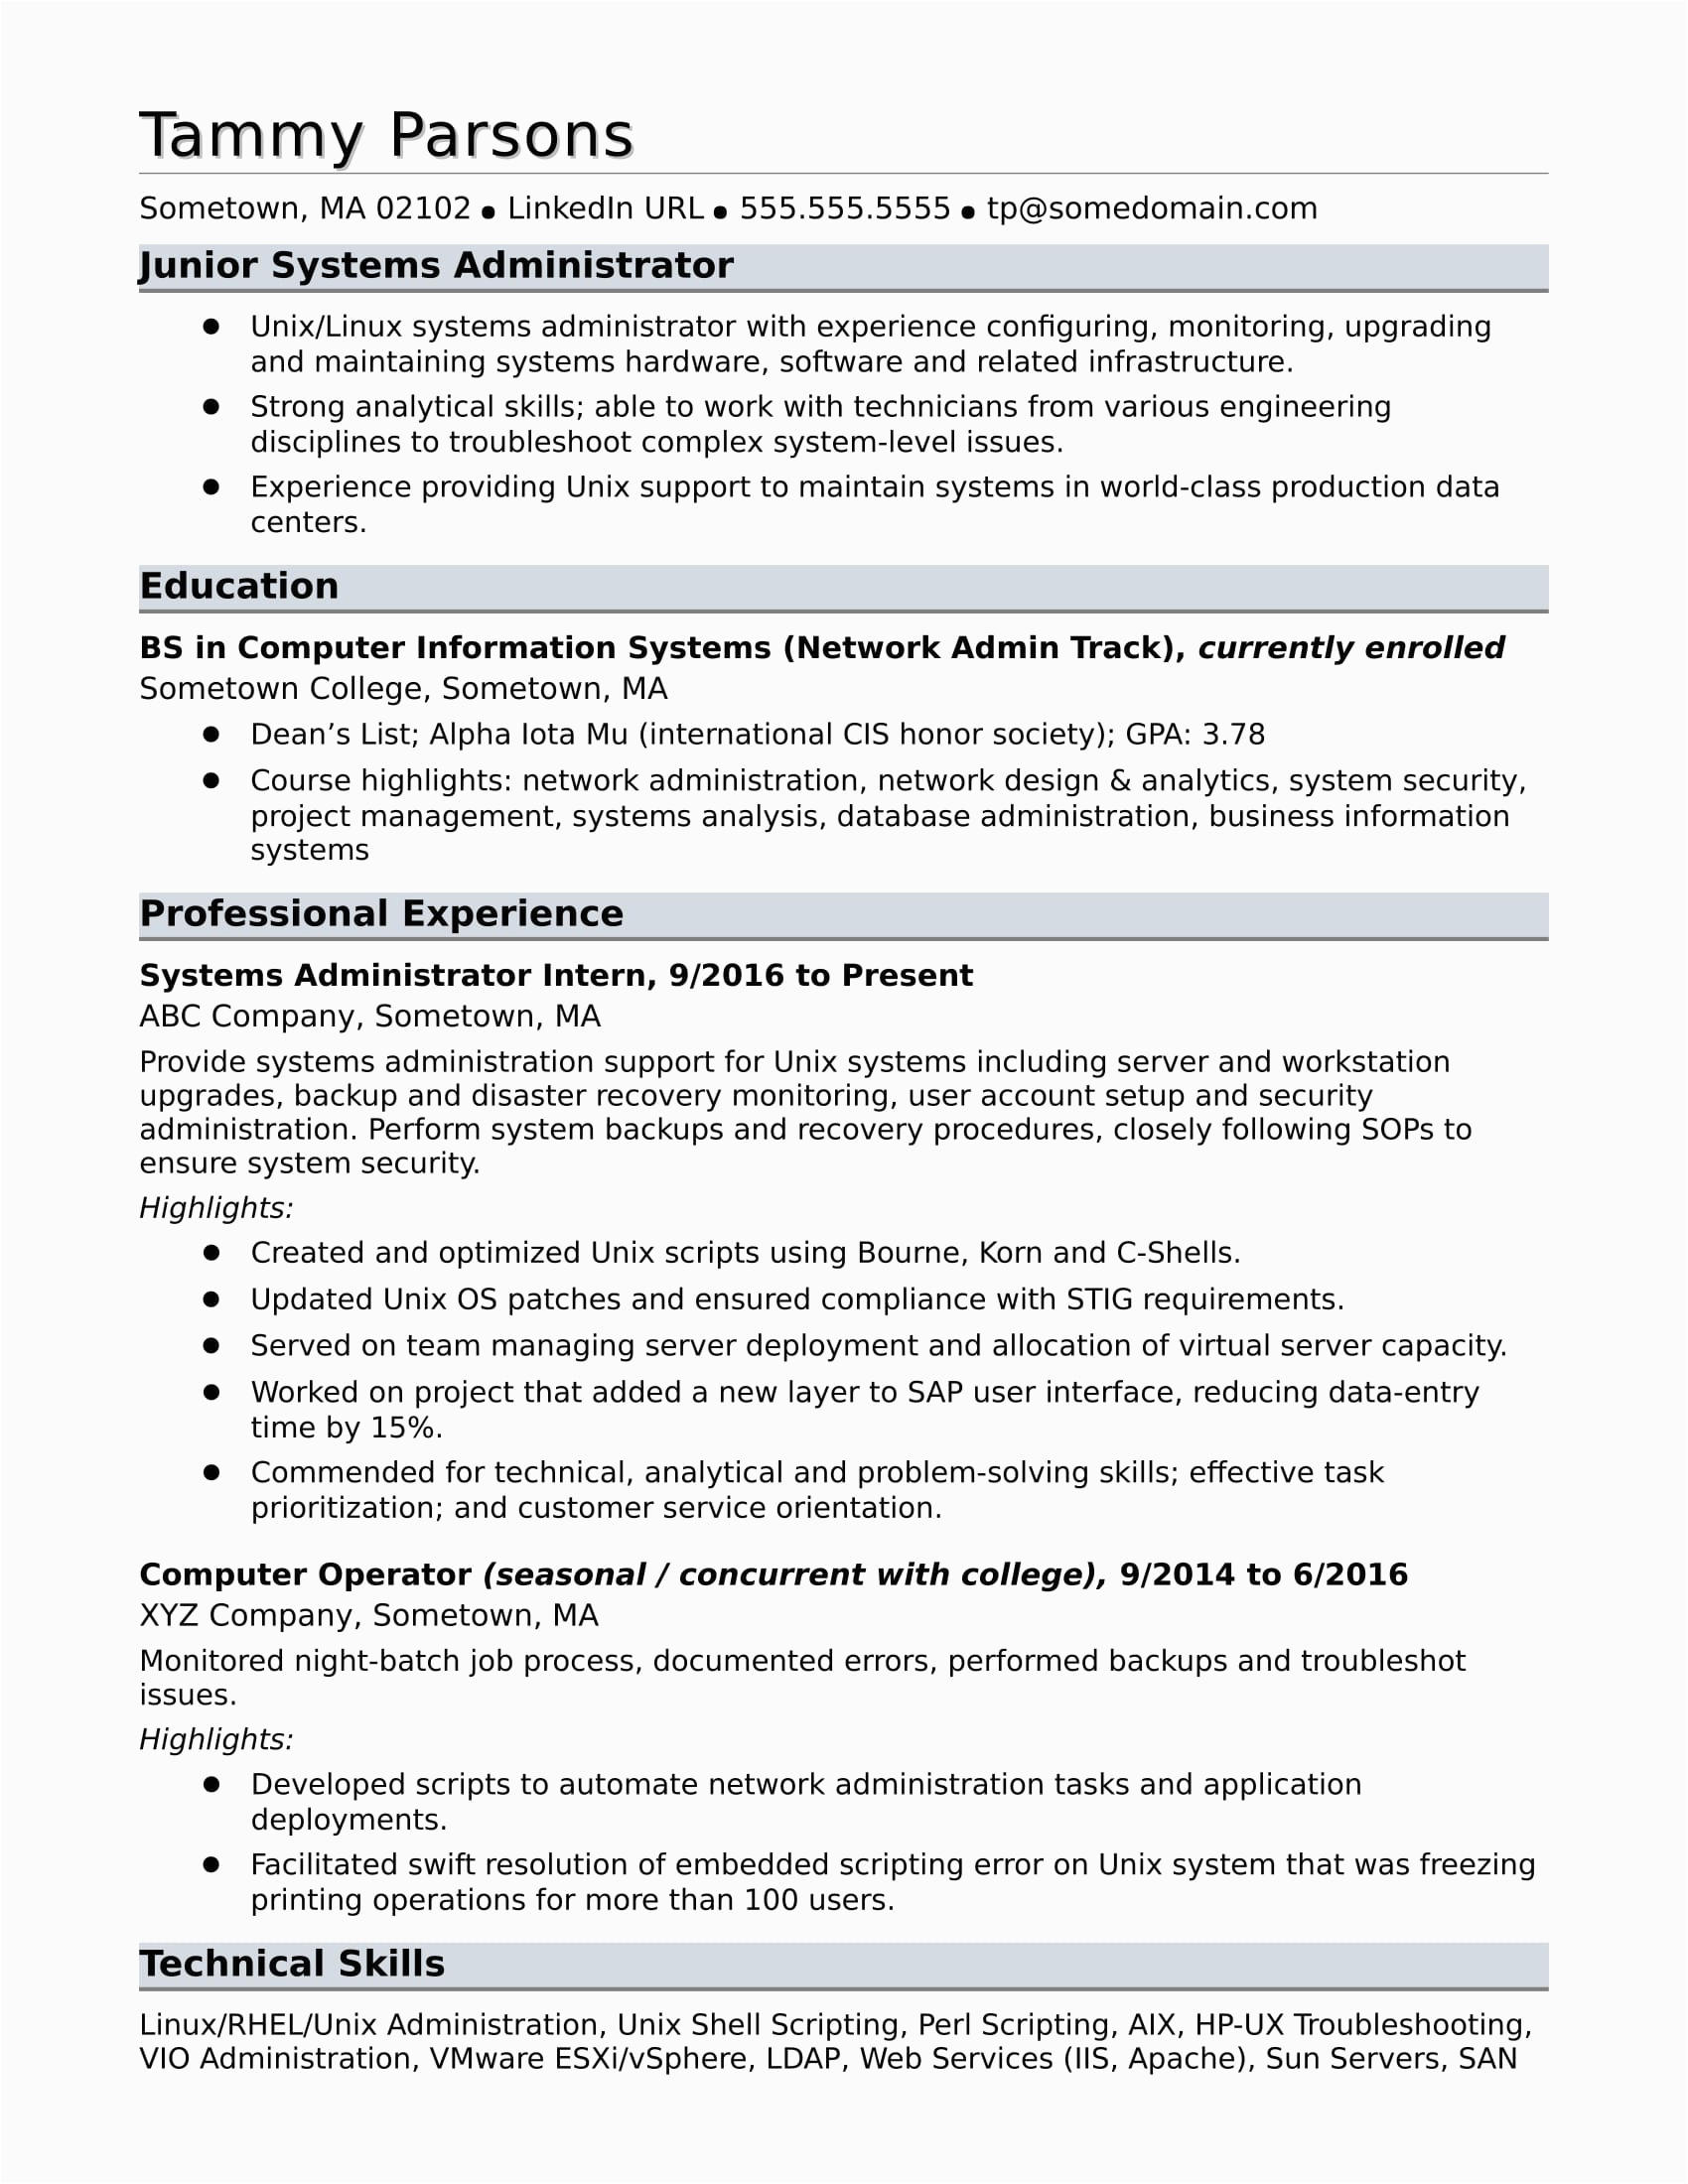 Linux Admin Resume Sample for Freshers Linux System Admin Resumes Resume Template Database